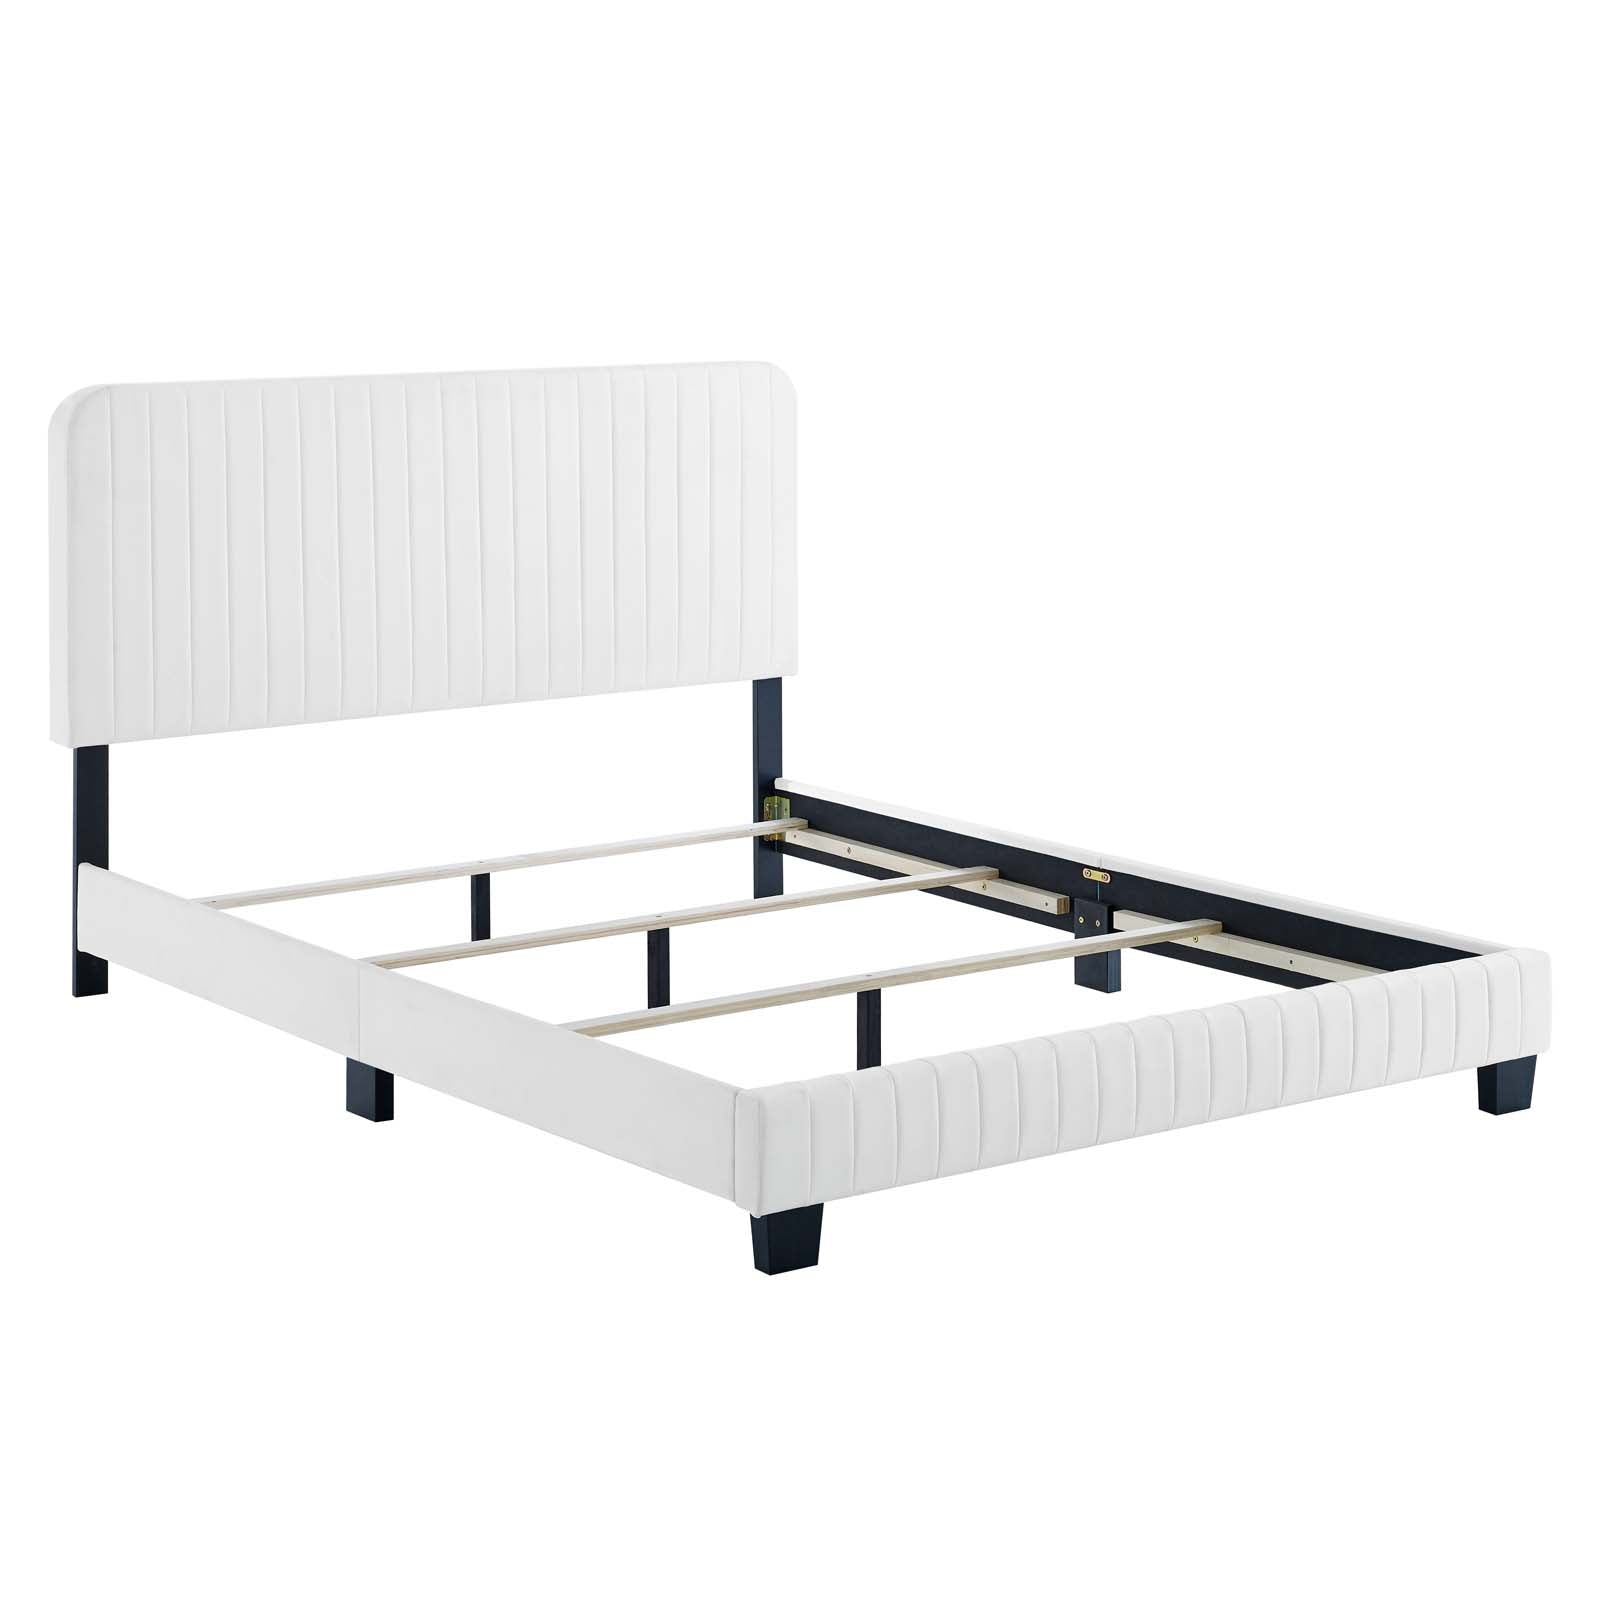 Modway Beds - Celine Channel Tufted Performance Velvet Queen Bed White